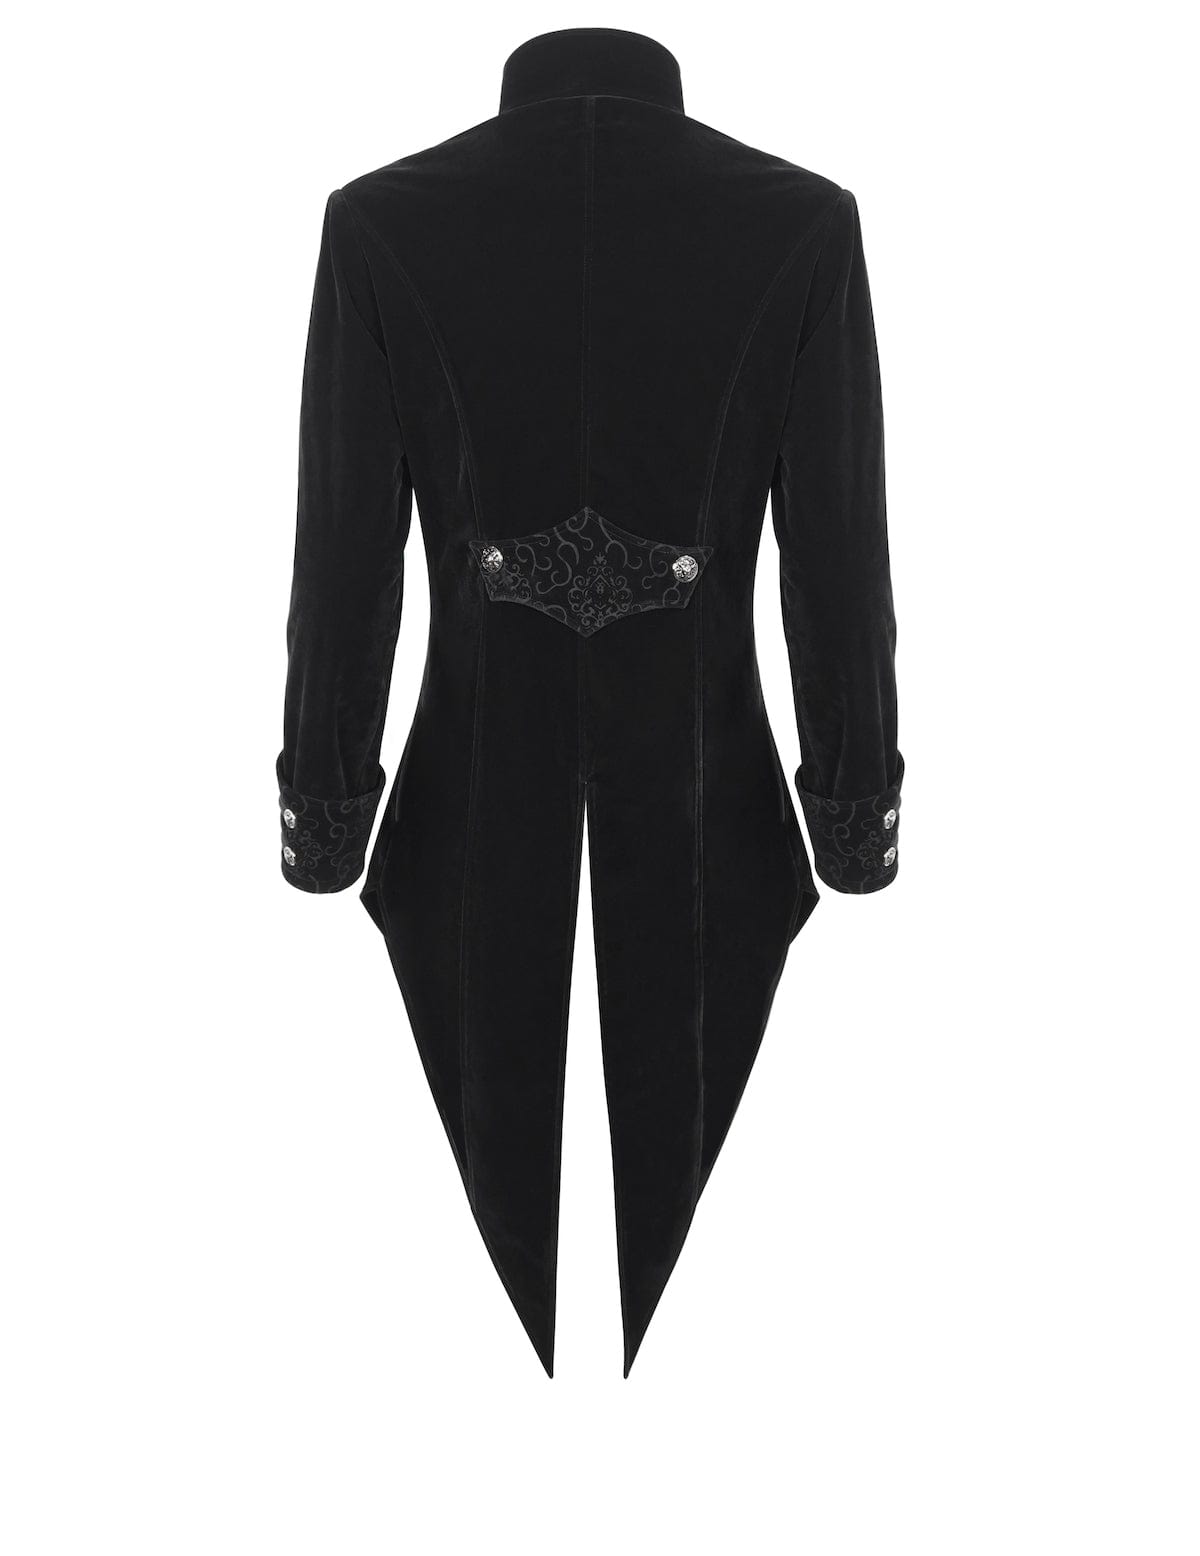 BACK OF THE GOTHIC CHAOS MAGIC TAILCOAT IN BLACK VELVET WITH STRONG TAILORING AND ORNATE BRAID AND BUTTON DETAILS FROM DEVIL FASHION AT GALLERY SERPENTINE